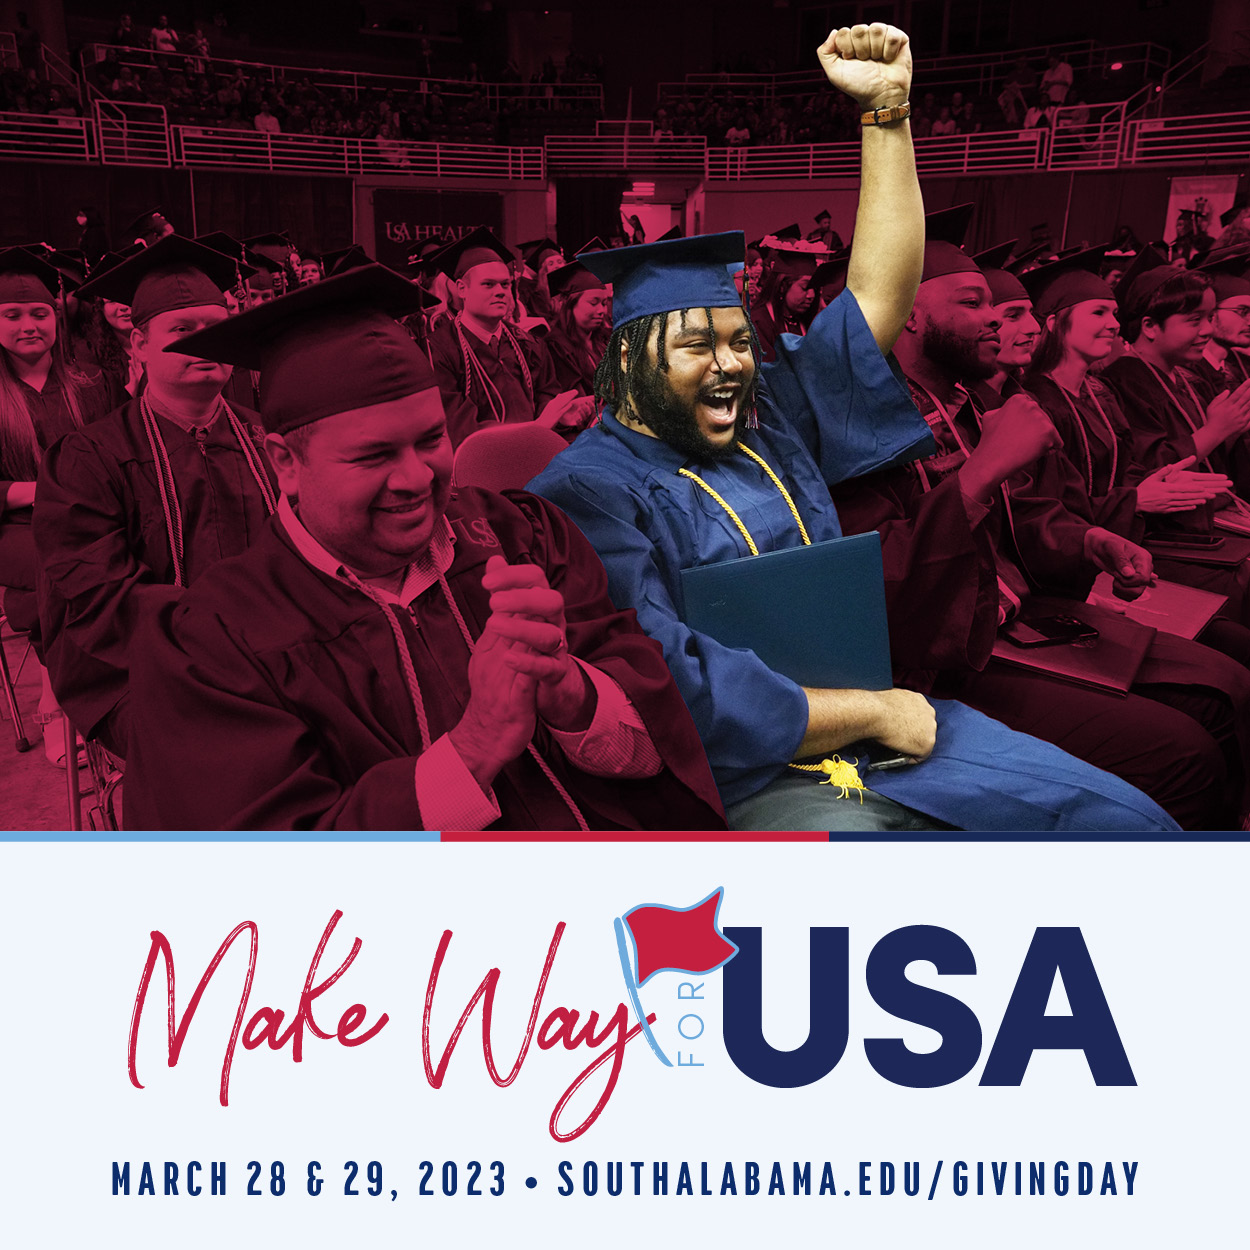 Make Way for USA March 28 and 29, 2023 Southalabama.edu/givingday with image of graduates in cap and gowns cheering.